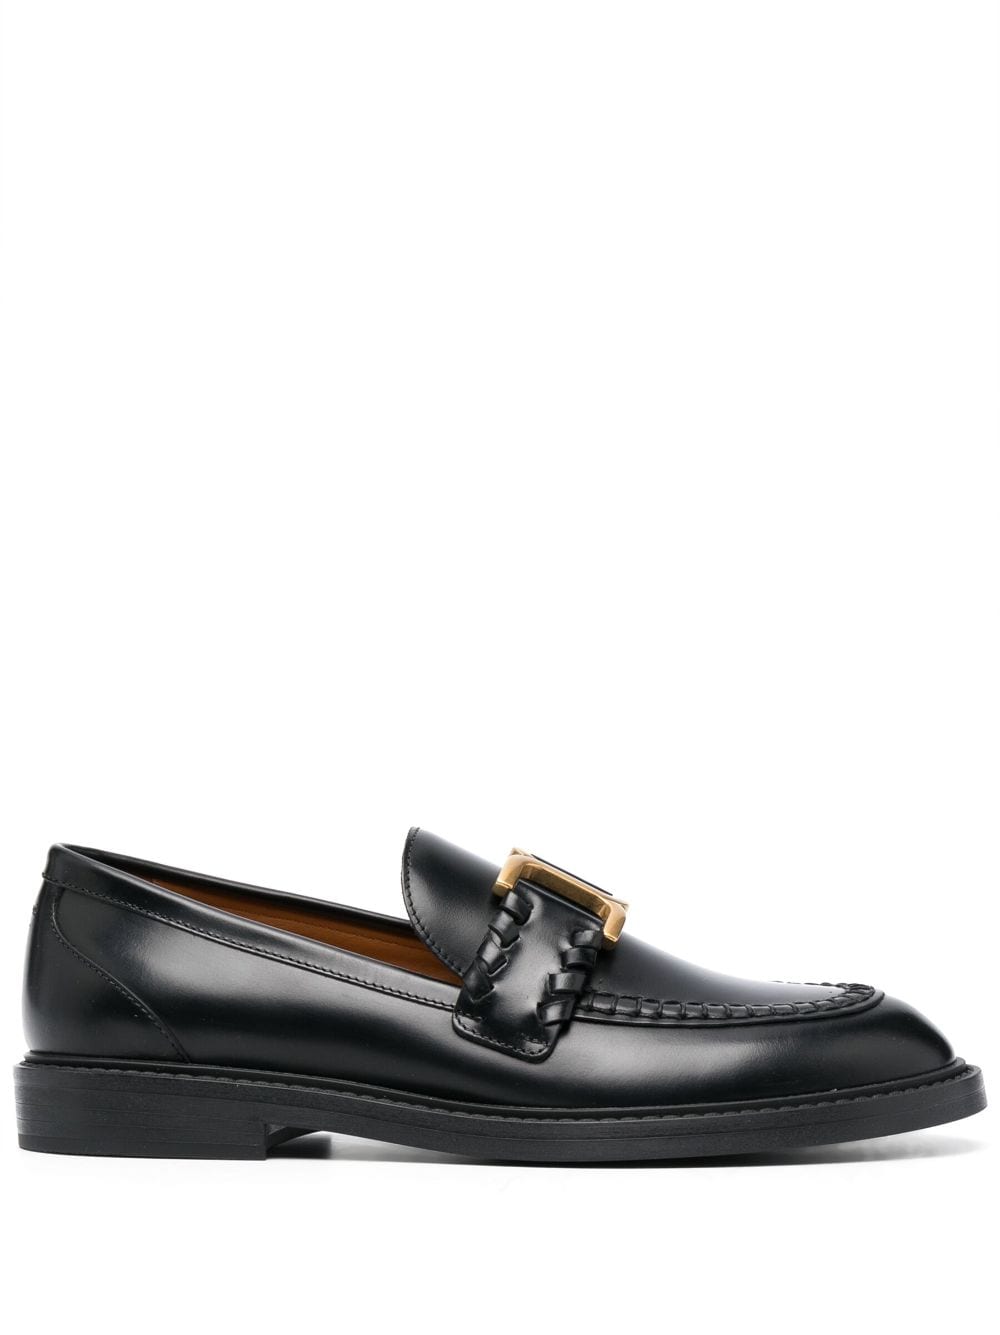 CHLOÉ Black Leather Loafers for Women - Spring/Summer 2024 Collection